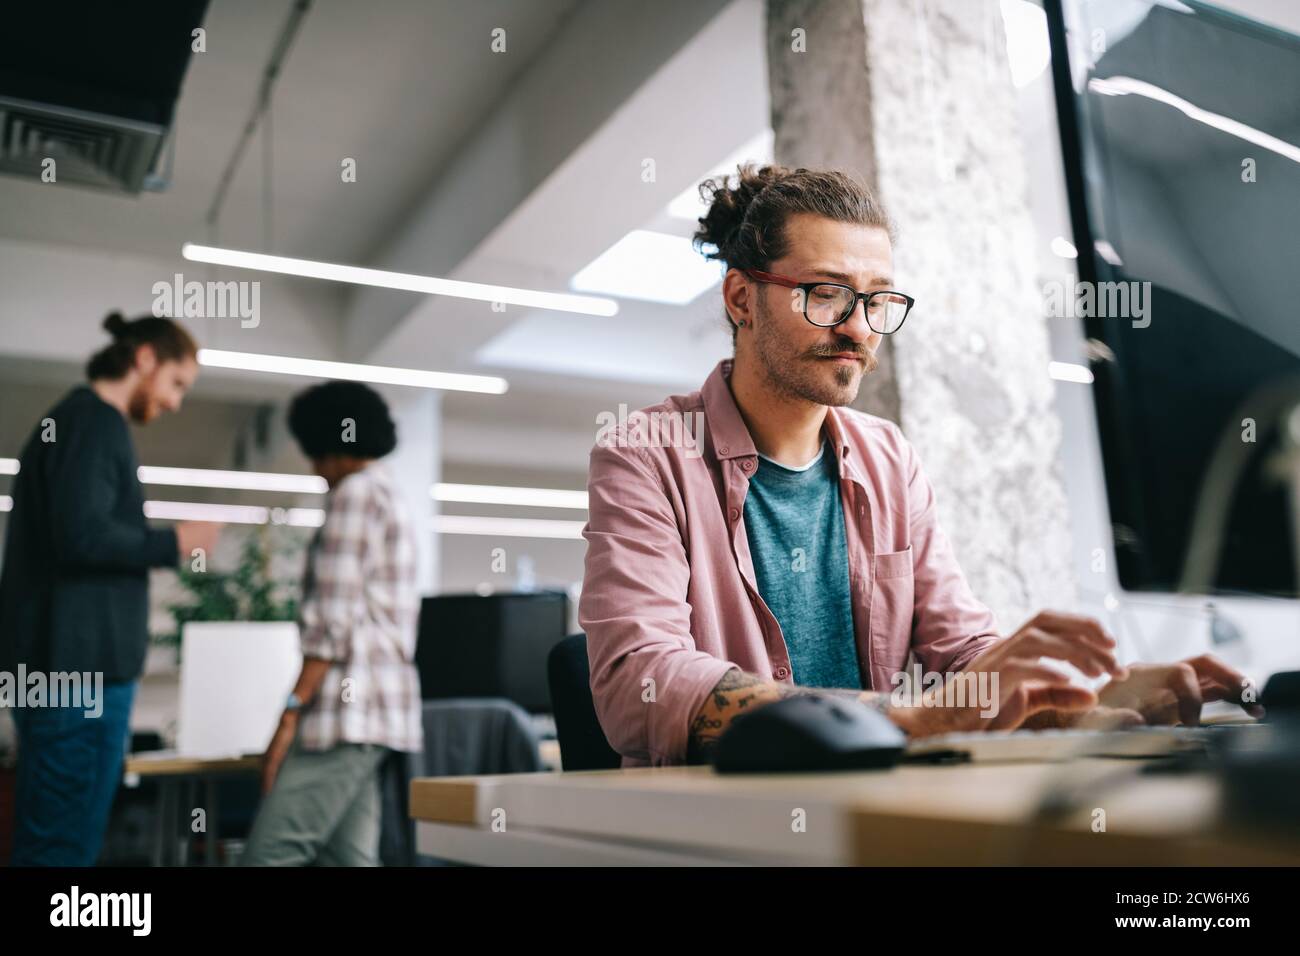 Programmer working and developing software in office Stock Photo